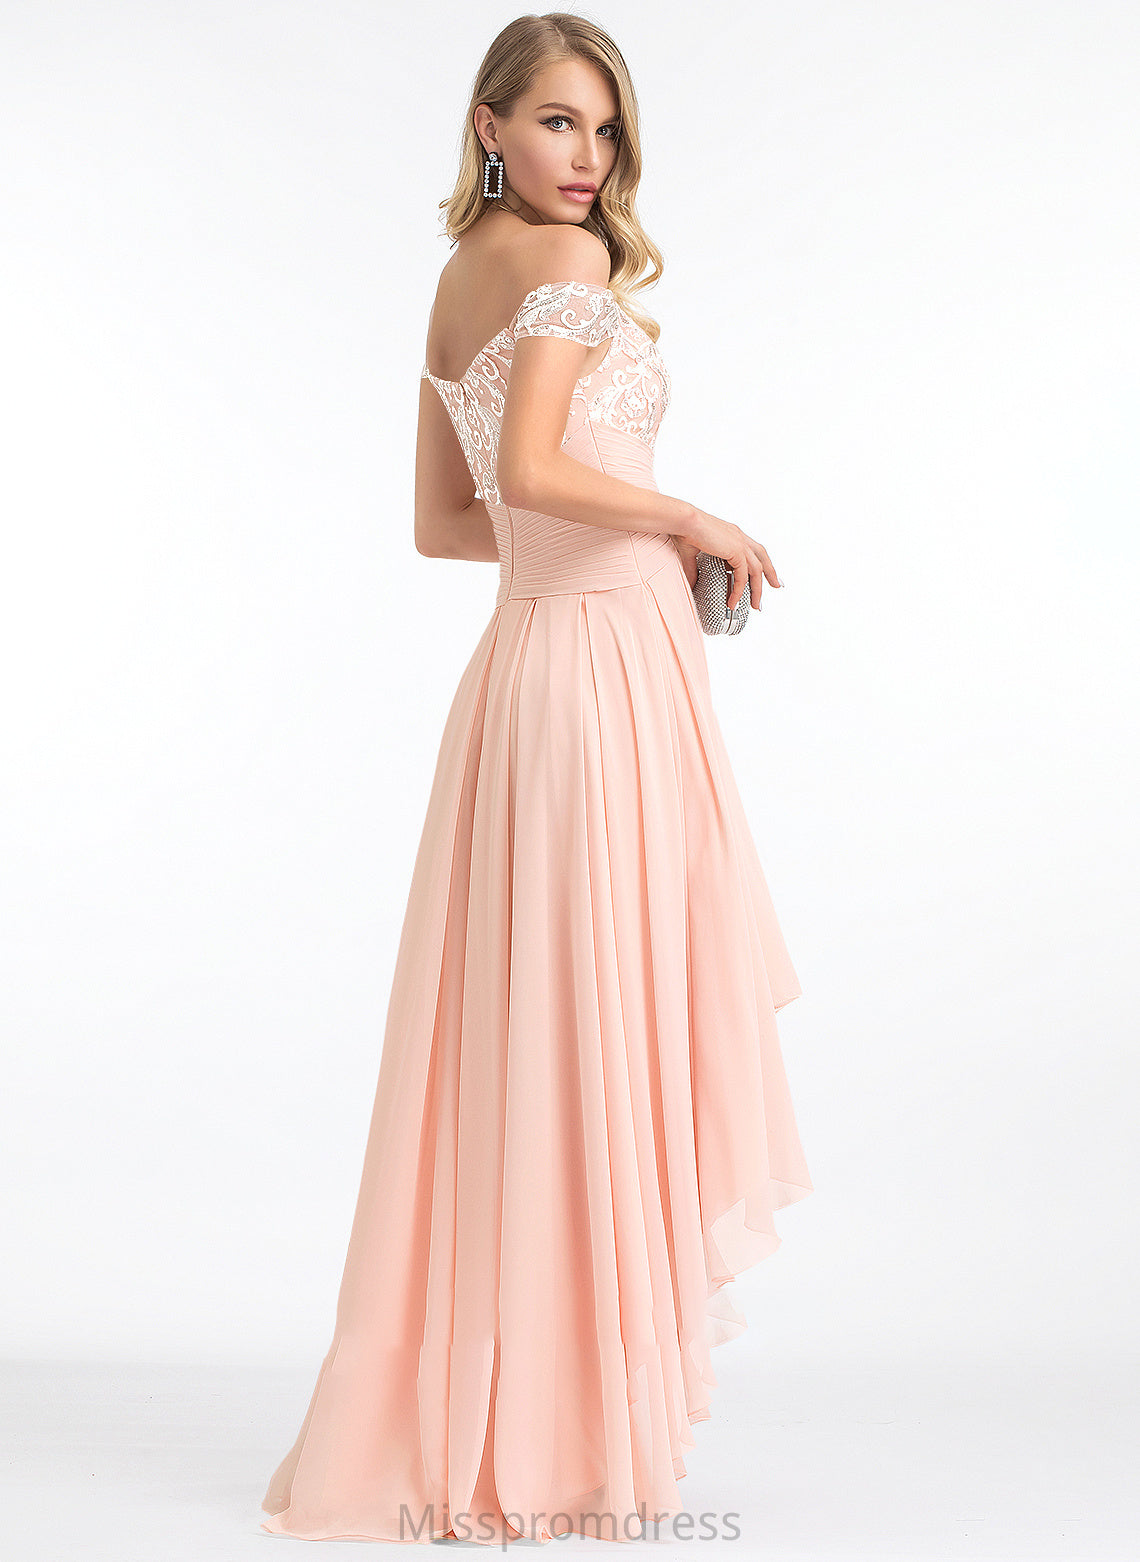 With Anya Prom Dresses Chiffon Asymmetrical A-Line Sequins Off-the-Shoulder